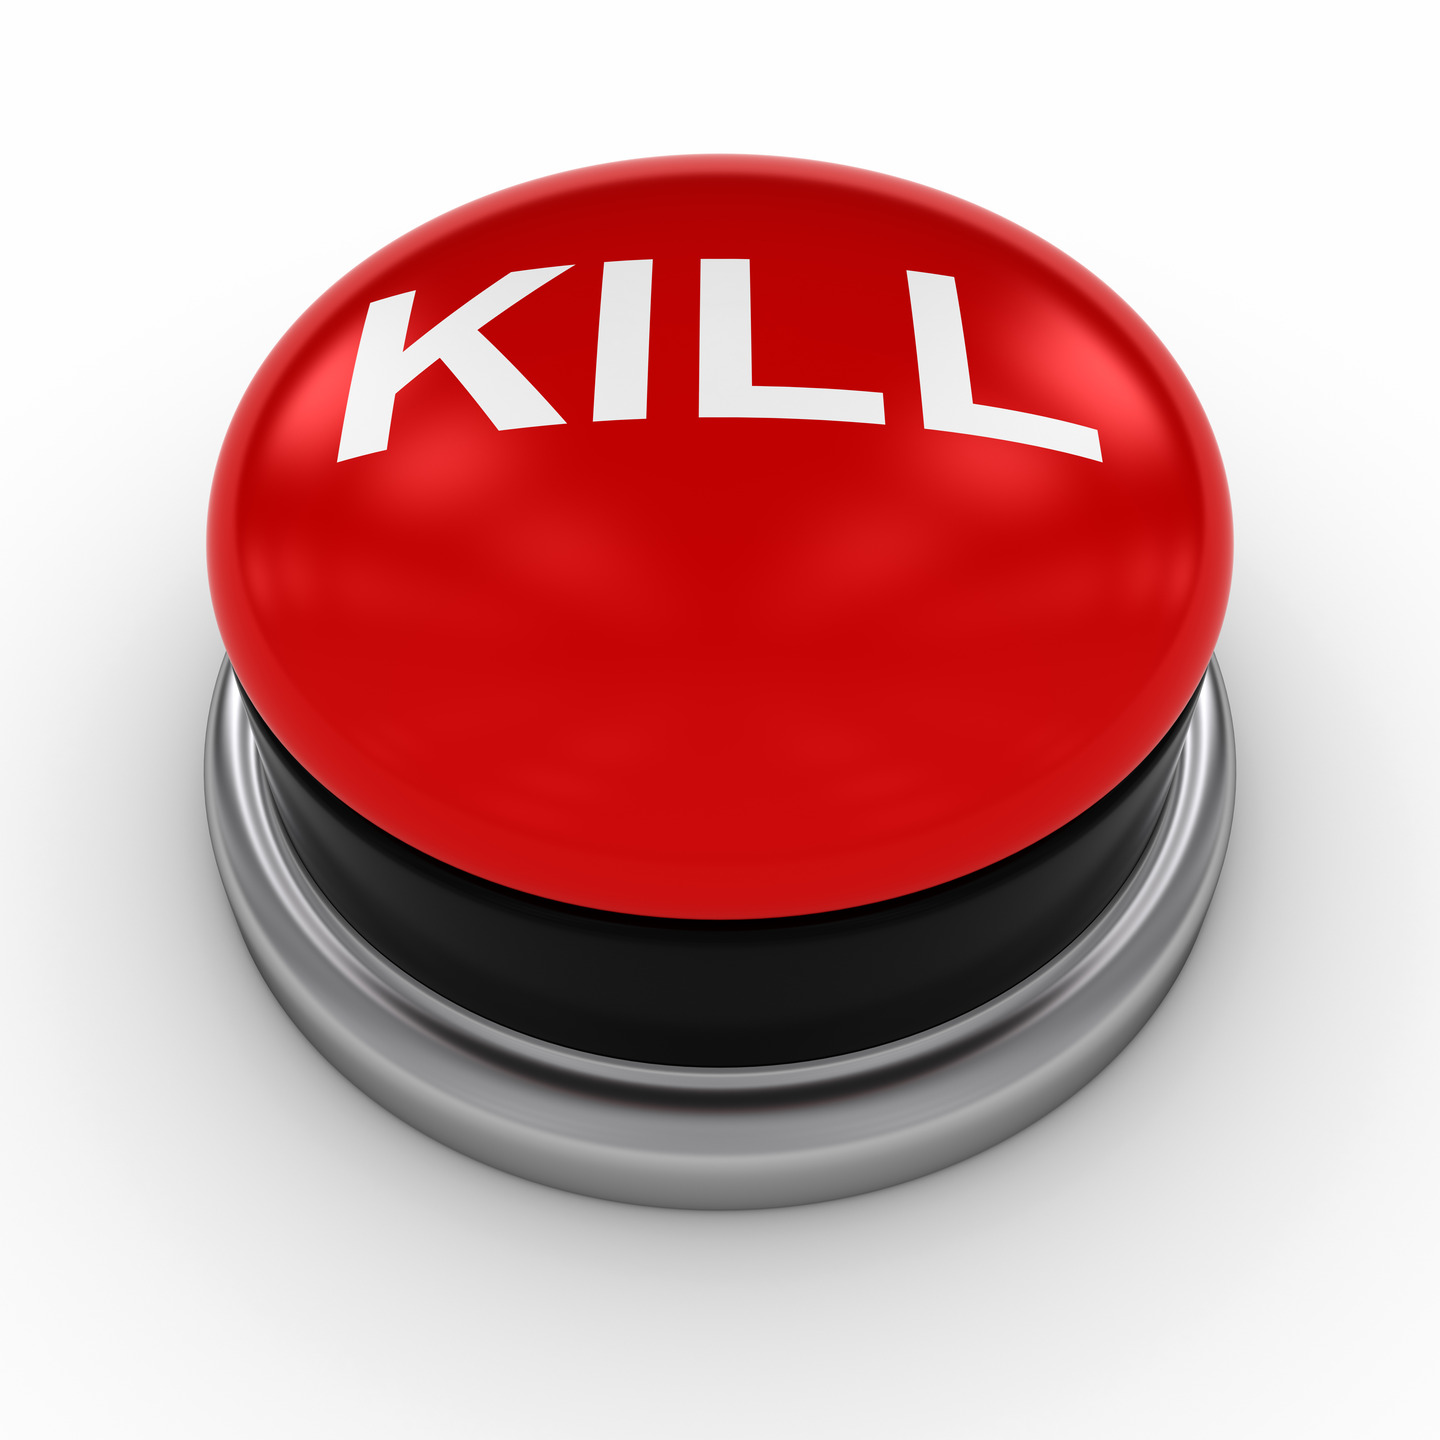 A big red button, or kill switch, won't actually BE a big red button.